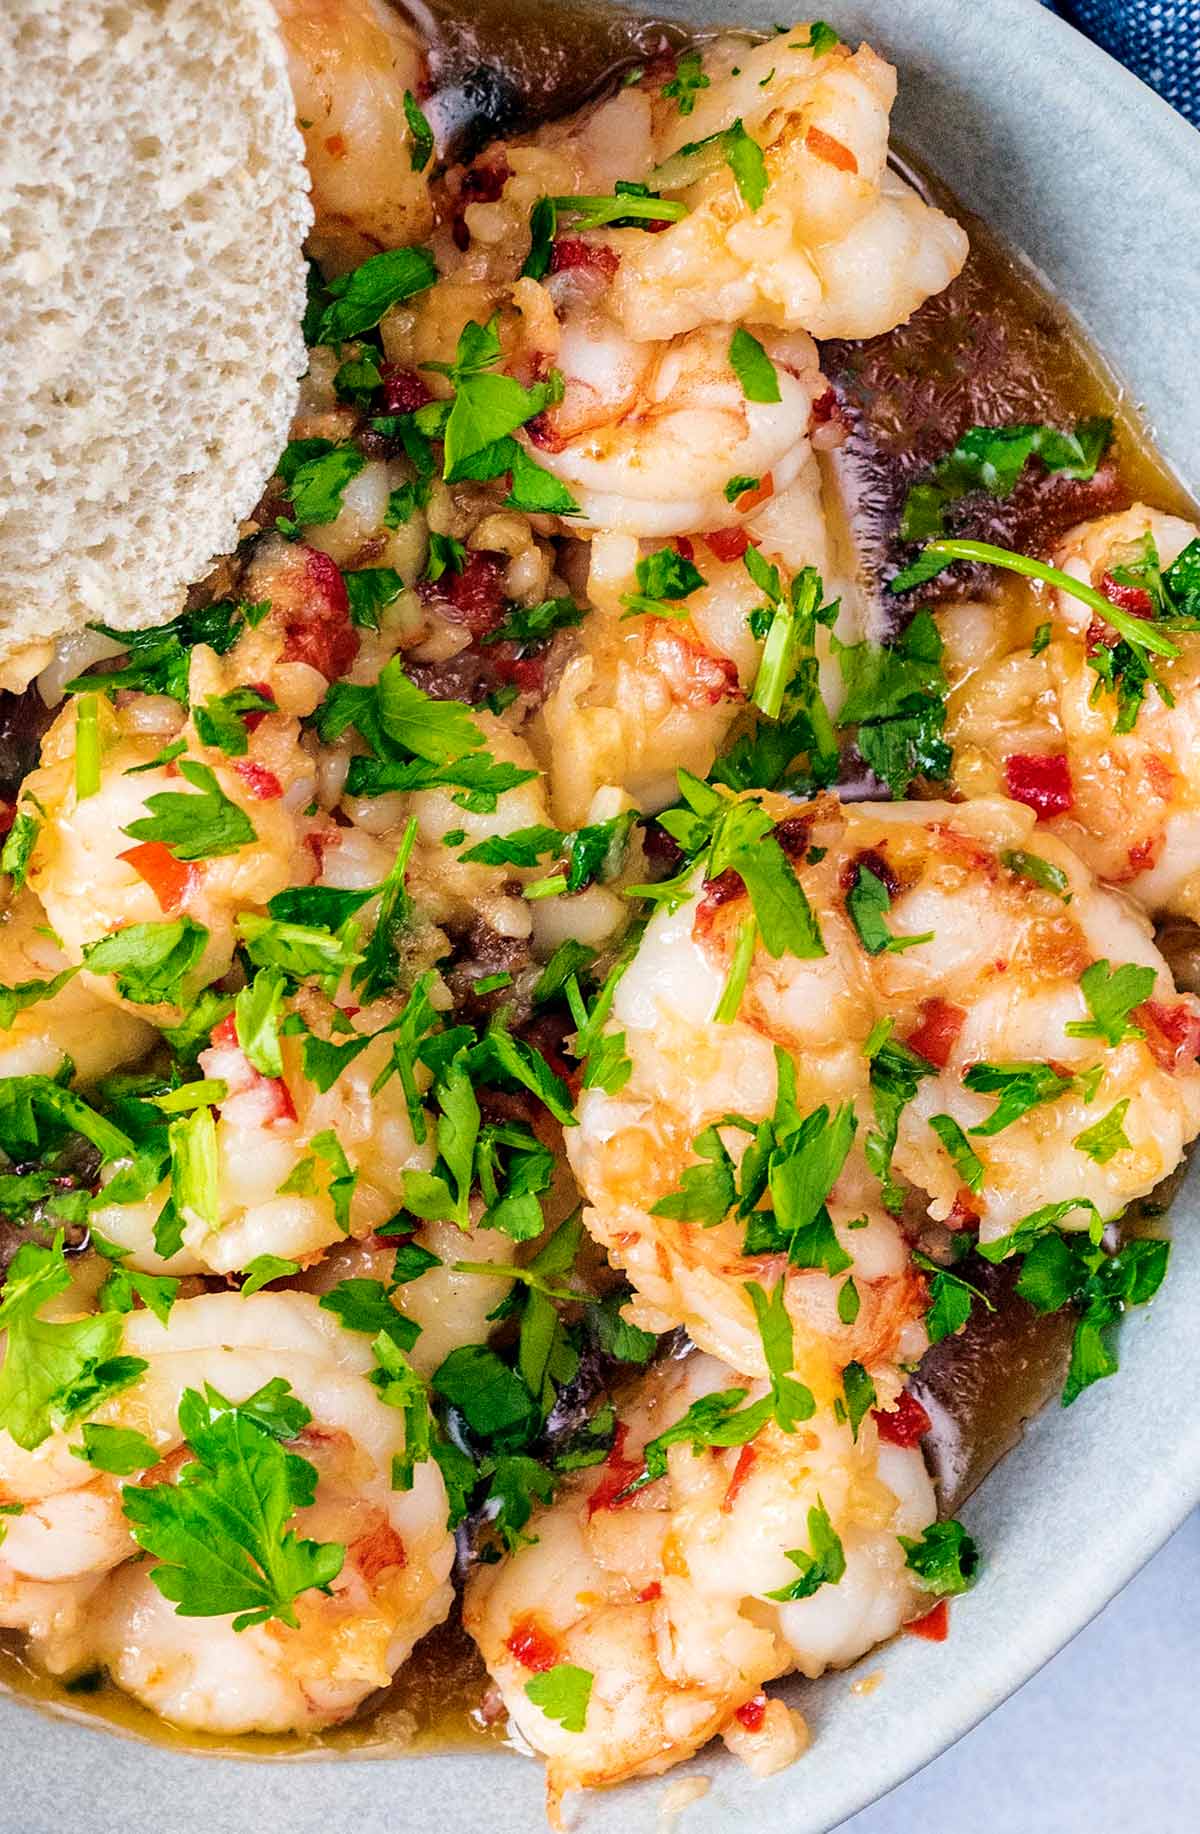 Cooked prawns with chopped herbs scattered over them.